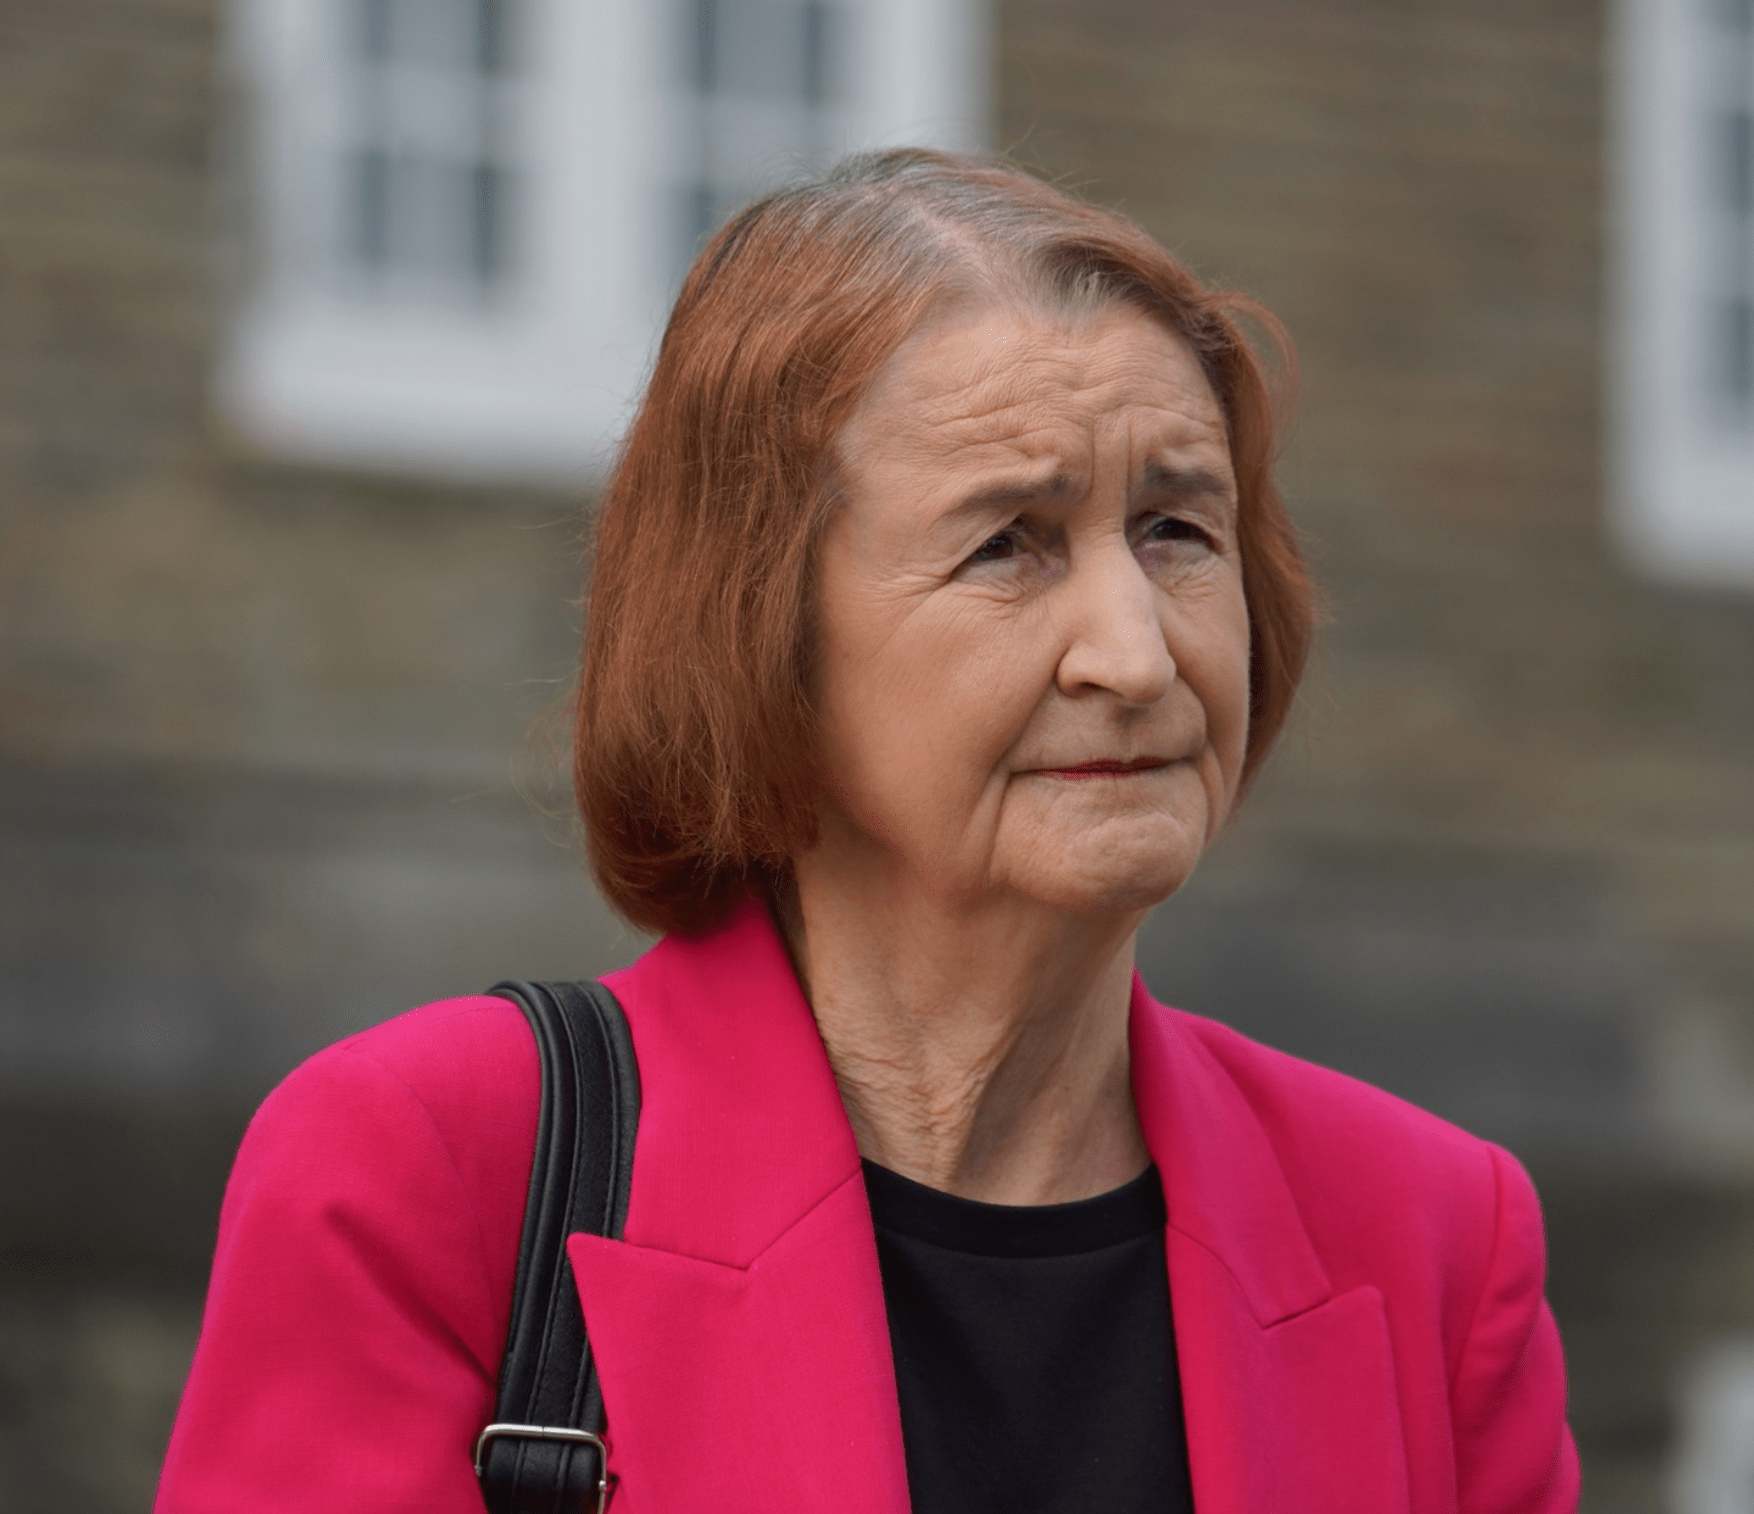 Dame Nia Griffith MP confirmed as Labour candidate for Llanelli